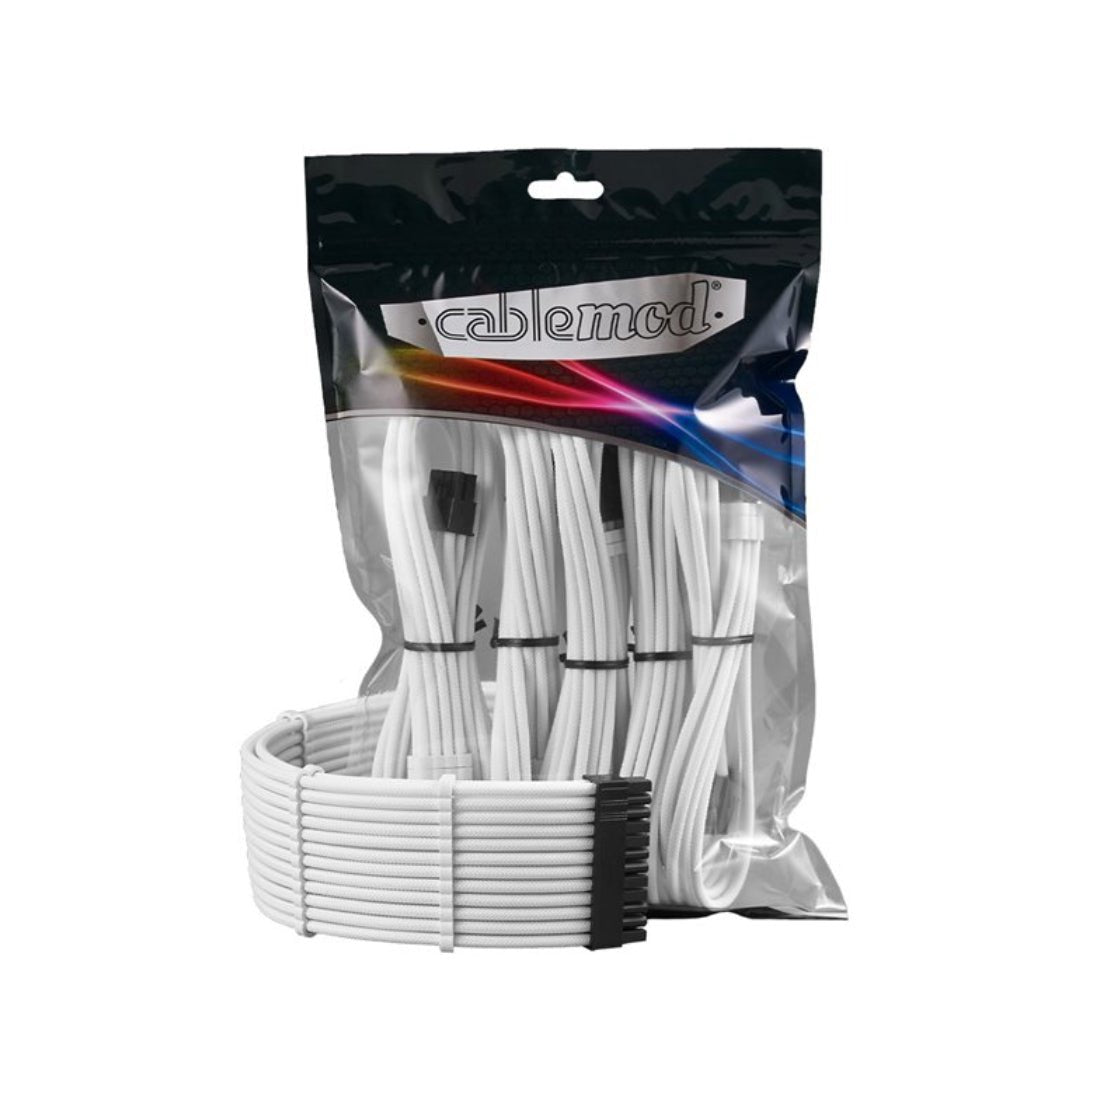 CableMod Pro ModMesh Sleeved 12VHPWR StealthSense Cable Extension Kit (White, 16-pin to Triple 8-pin) - كابل - Store 974 | ستور ٩٧٤